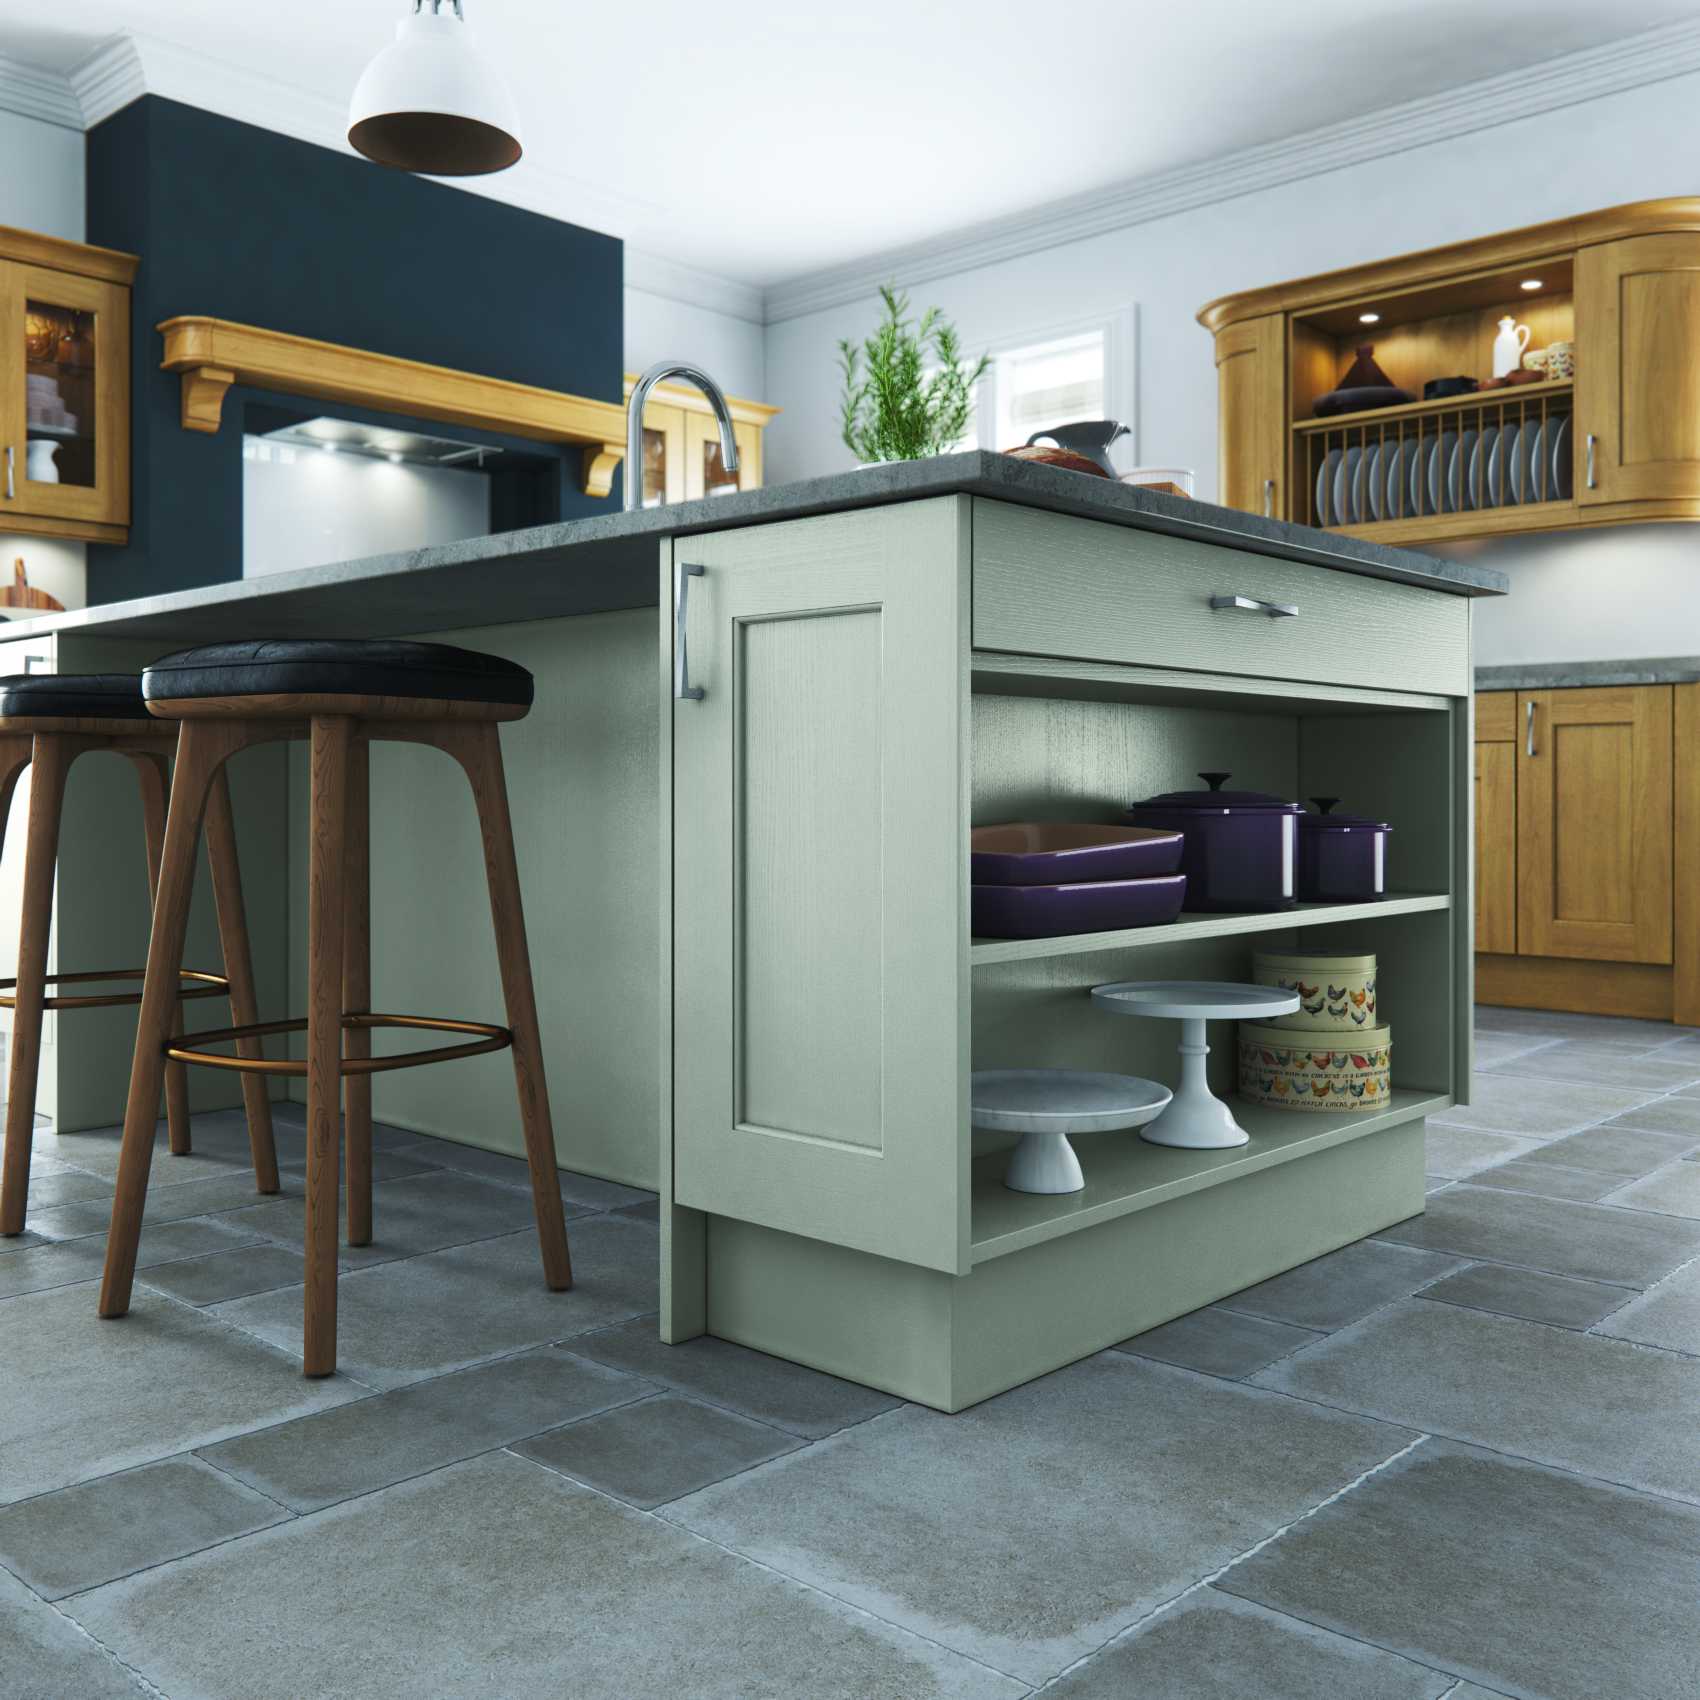 Light oak and stone painted contemporary shaker kitchen island detail